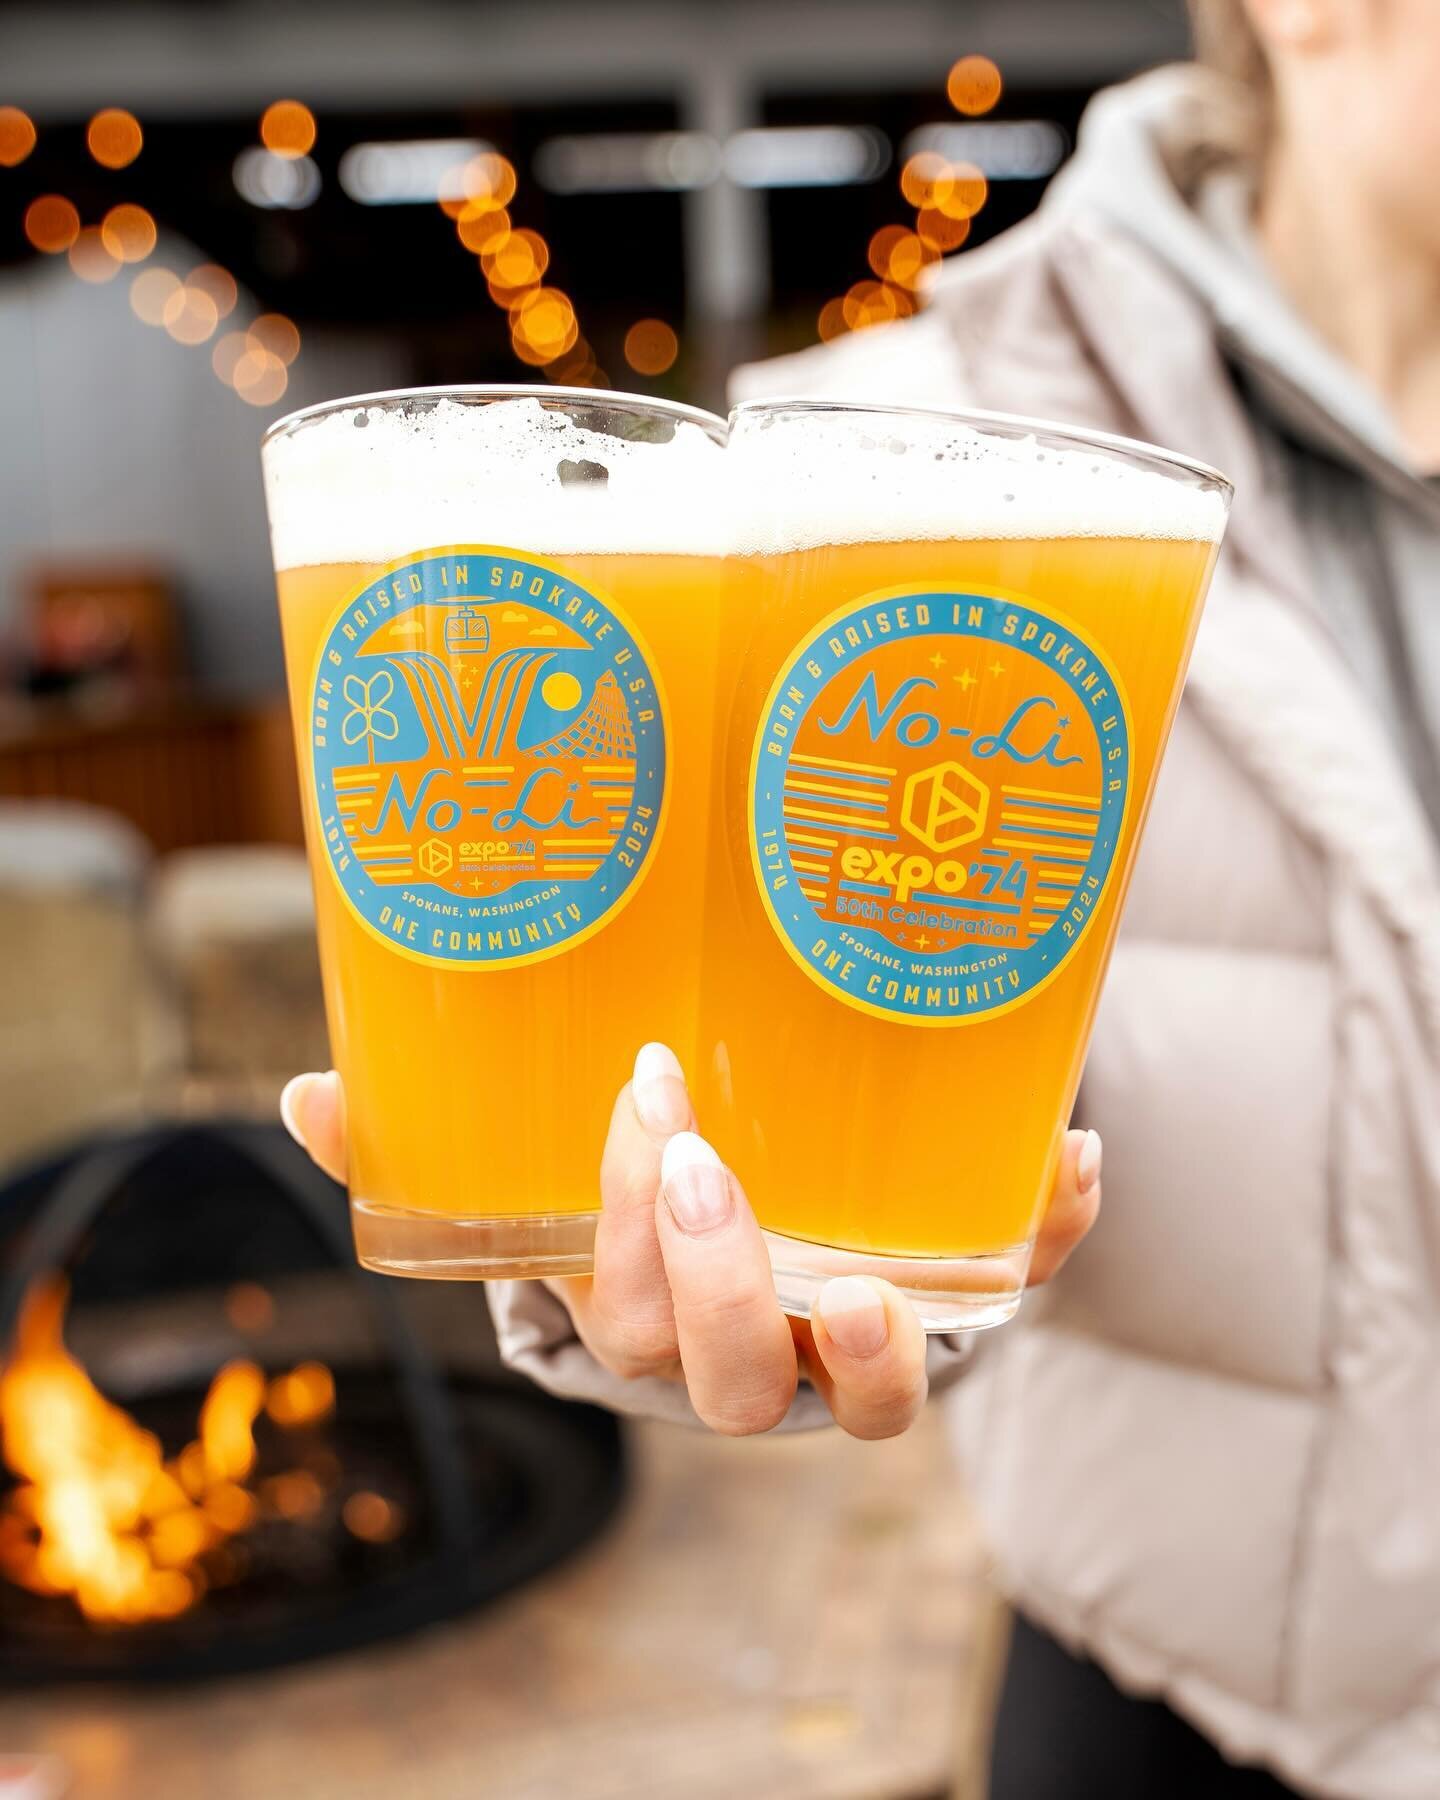 🎉 Expo &lsquo;74 50th Celebration Pint Glass 🎉

The No-Li April pint glass! Join us at the Beer Campus on Mondays &amp; Wednesdays, enjoy a pint of Squatch Pirate Juicy Haze or Corner Coast Golden Ale, and add this Expo Pint to your collection 💥